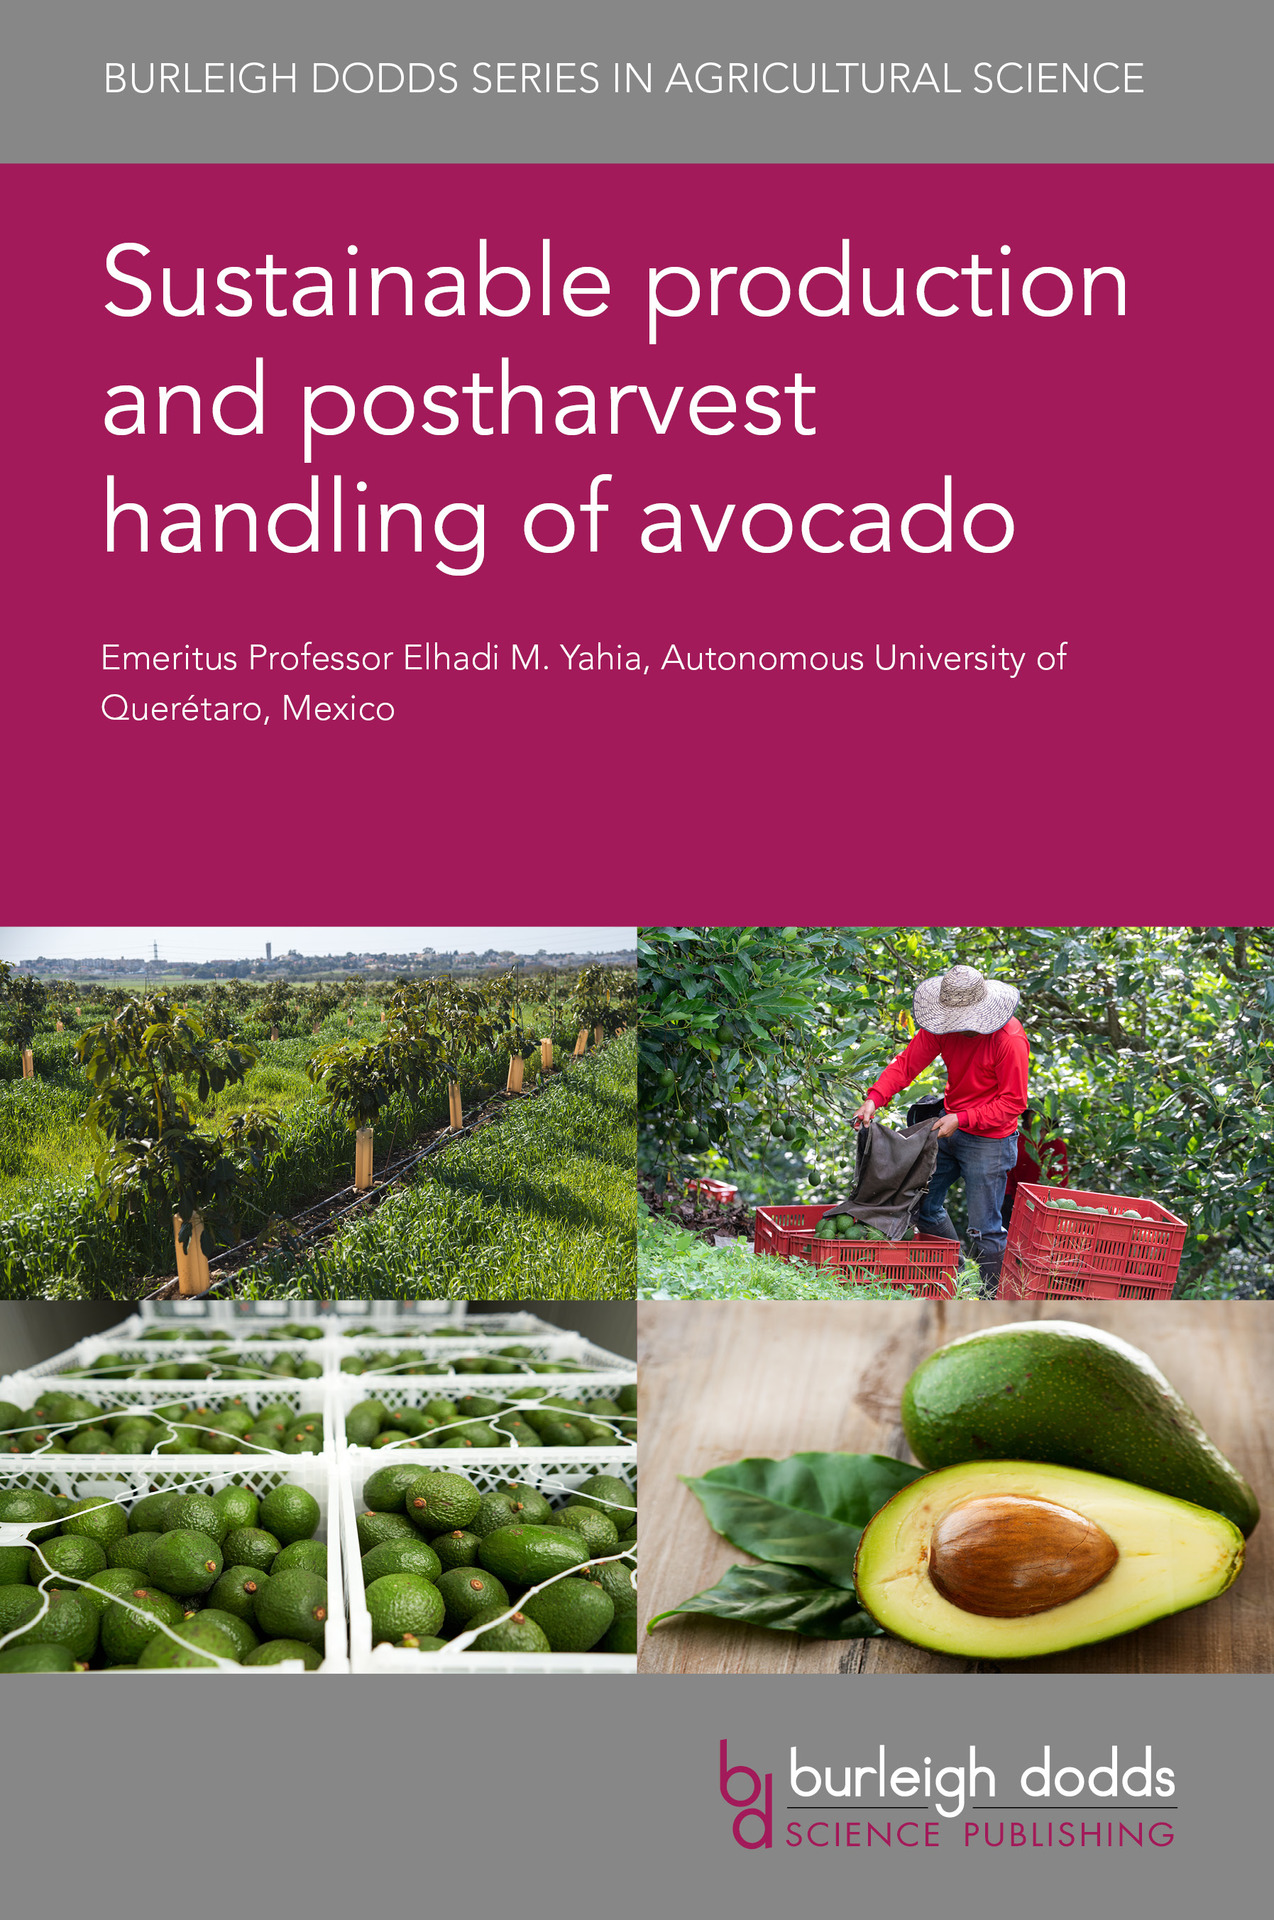 Sustainable production and post-harvest handling of avocado